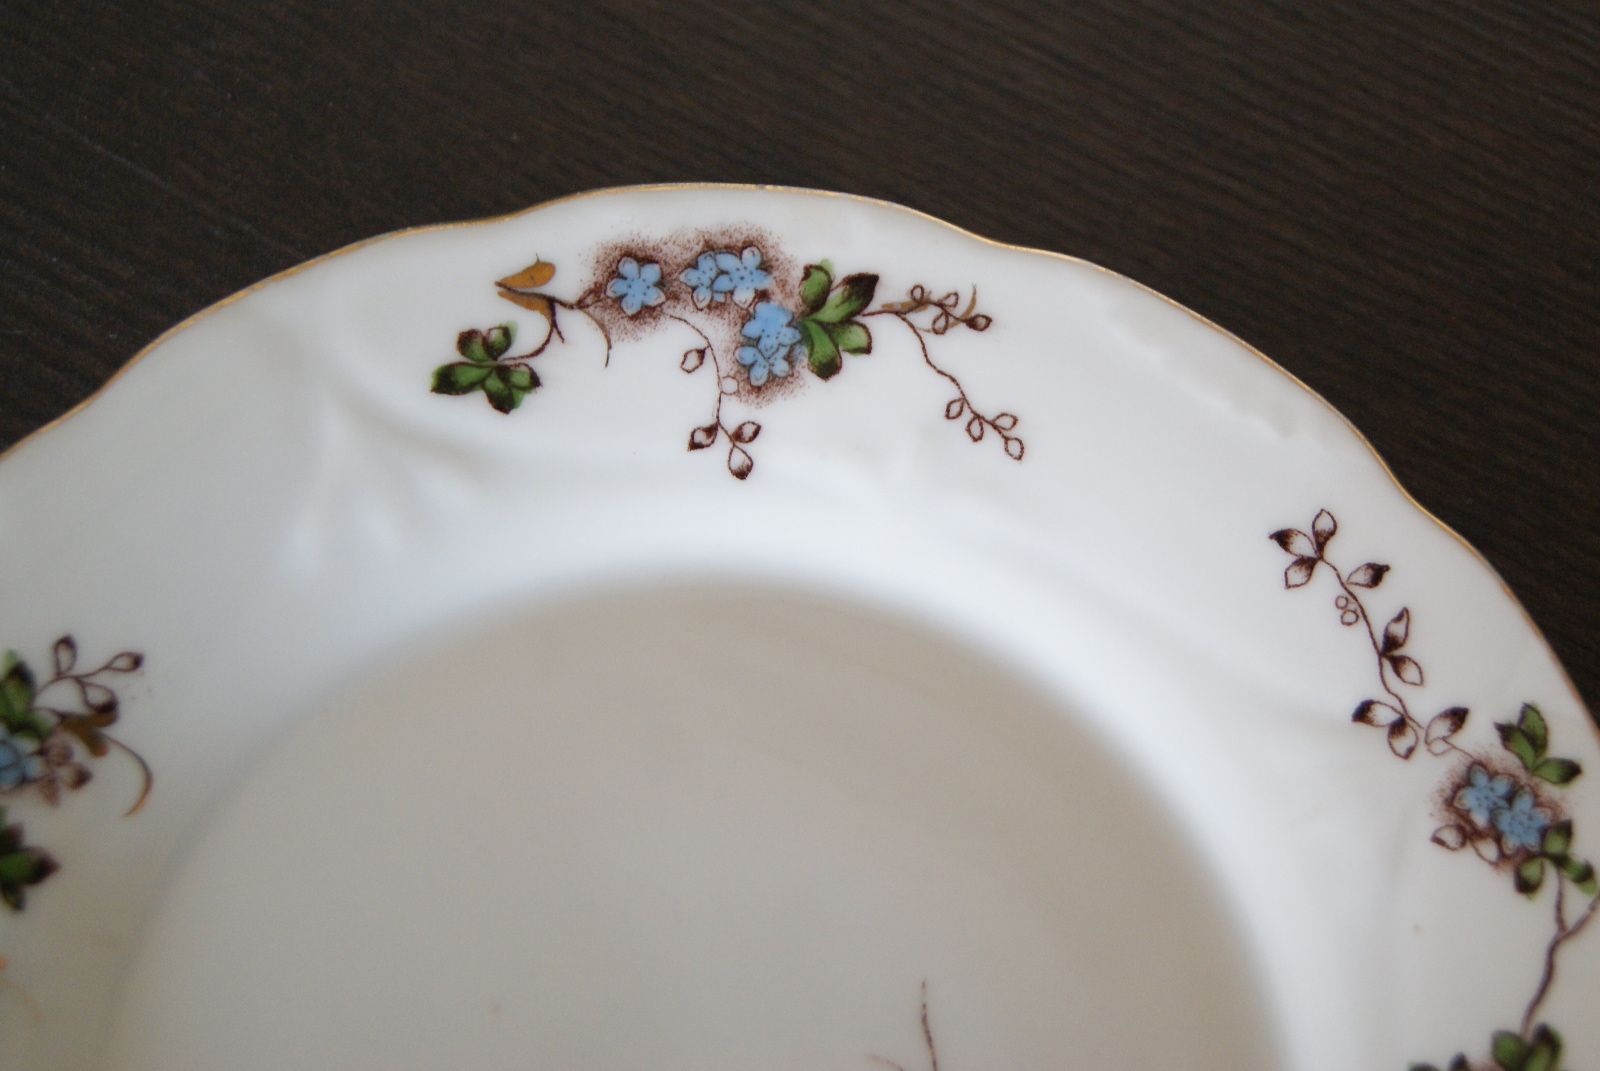 Porsgrund plate with blue flowers leaves and relief